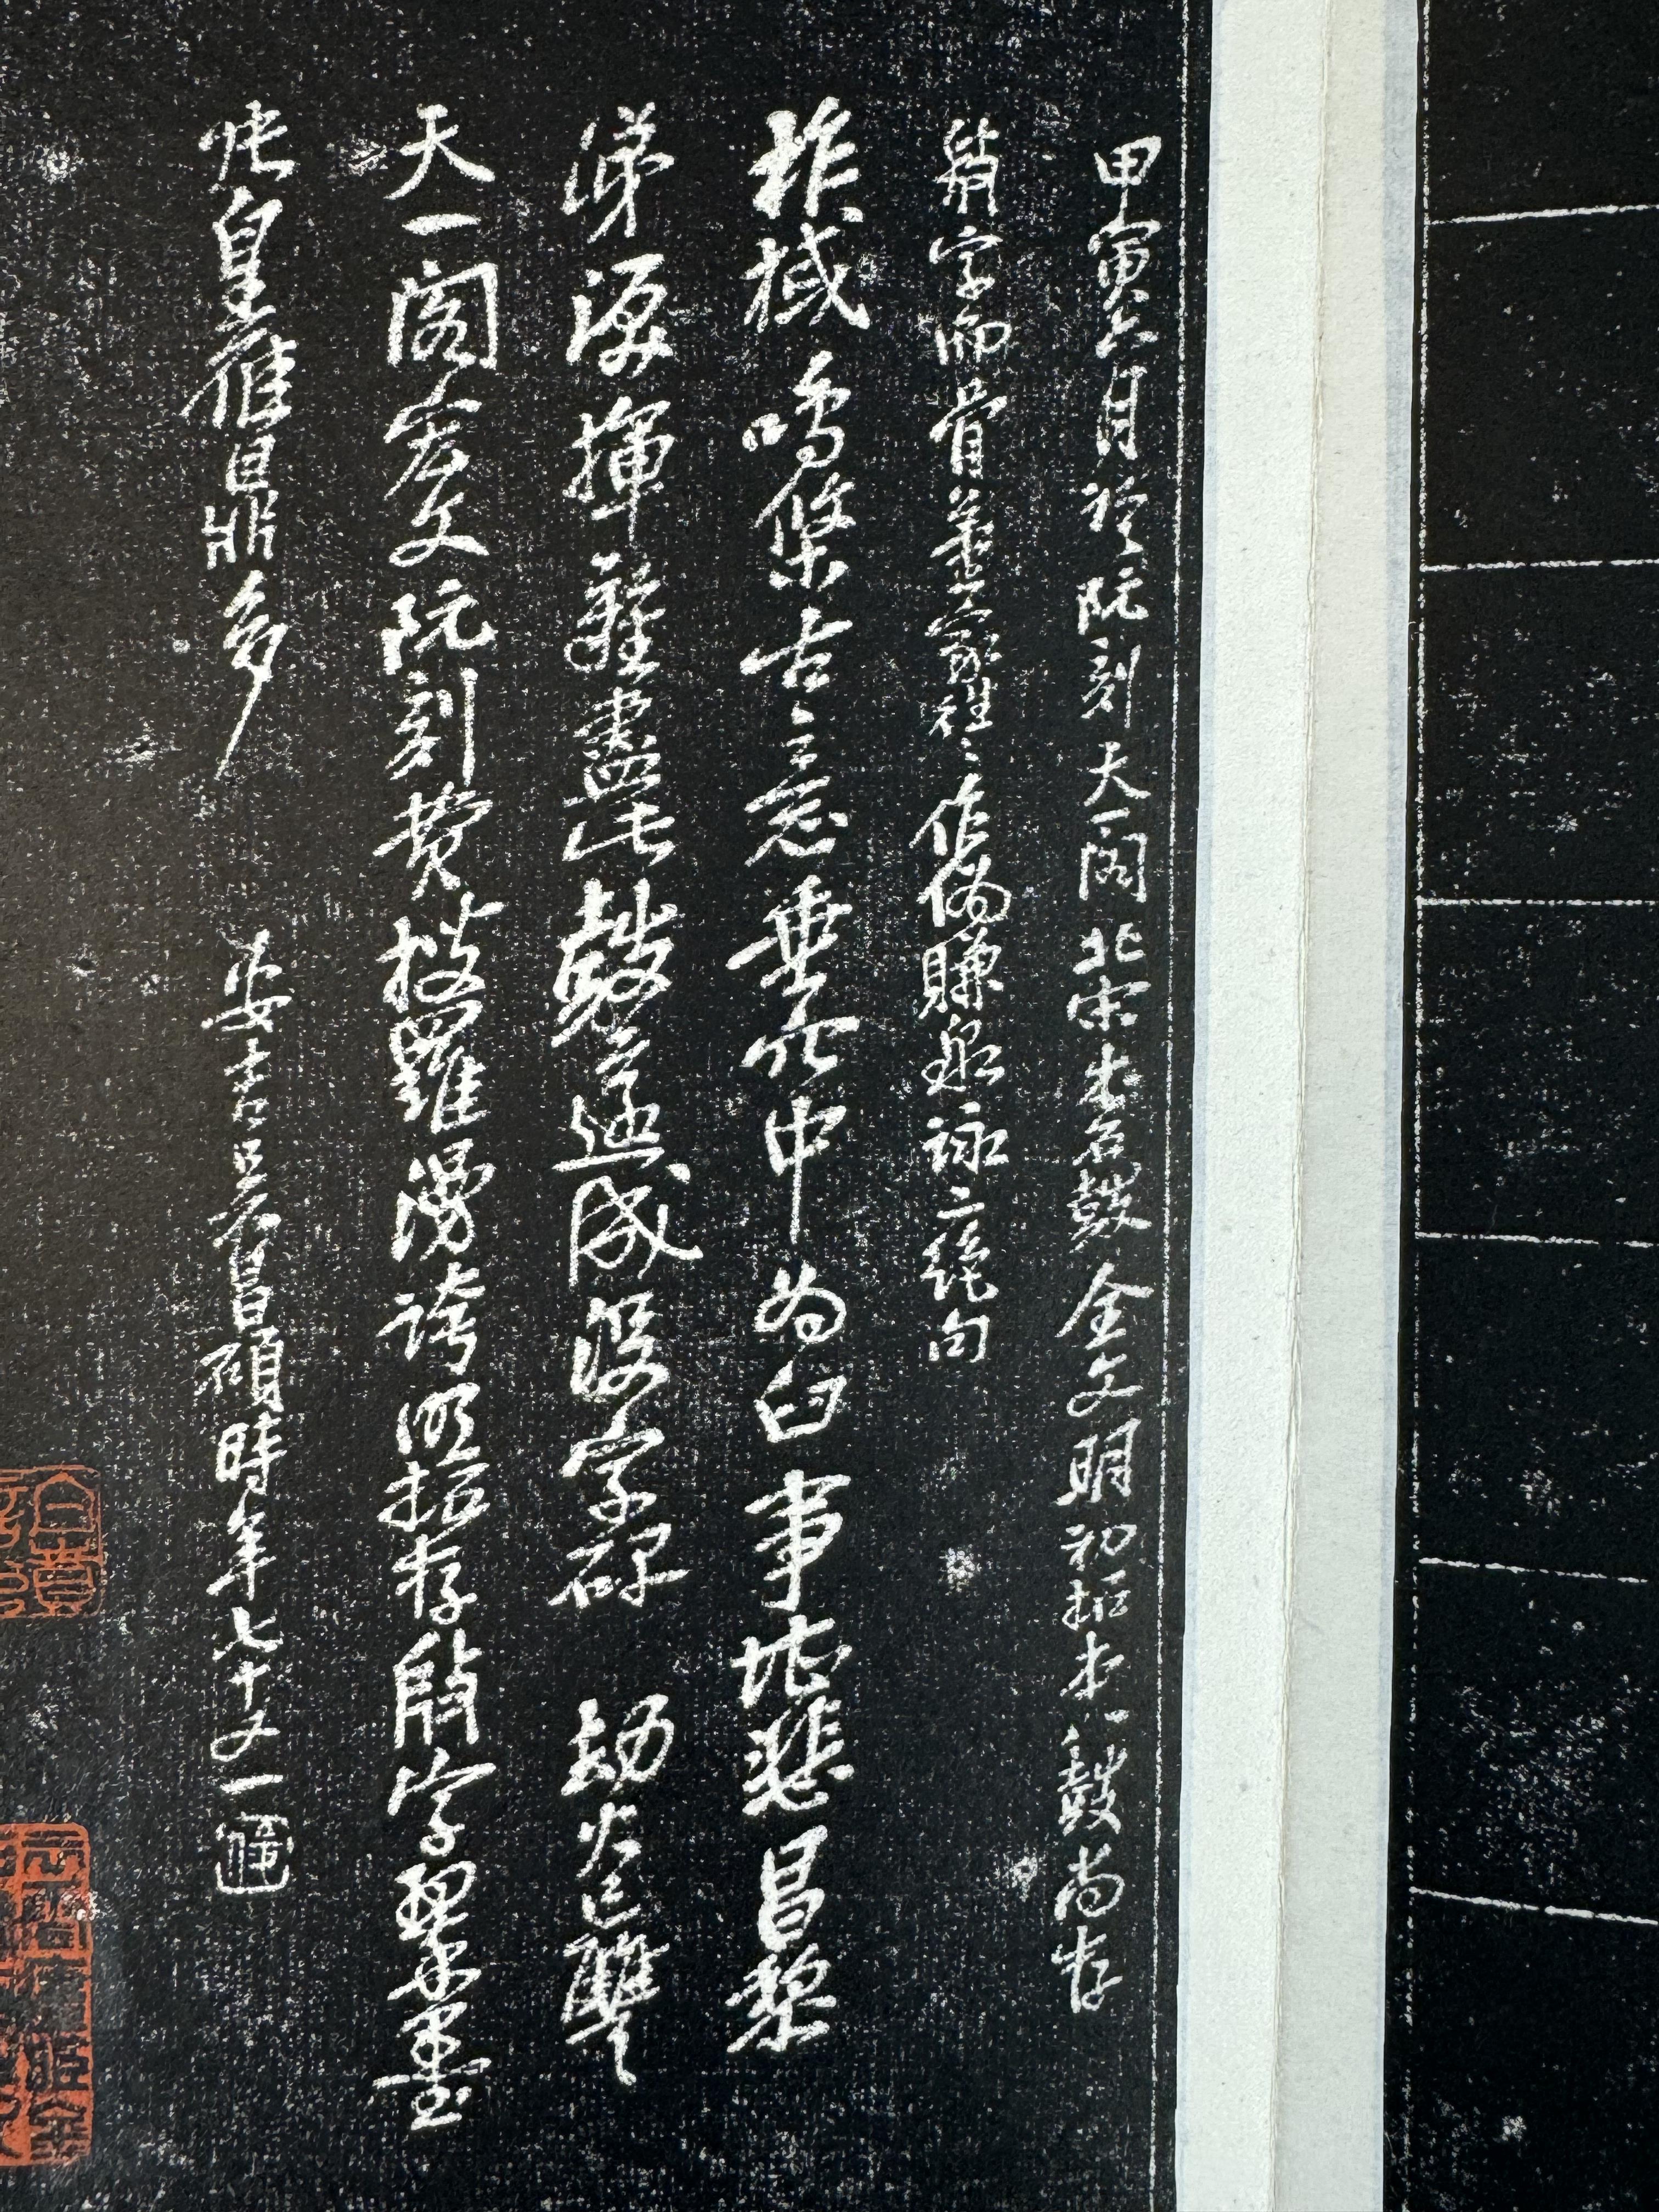 Two Chinese Calligraphy Rubbing, rubbing of Wu Changshuo's calligraphy and a rubbing of a tombstone - Image 4 of 6